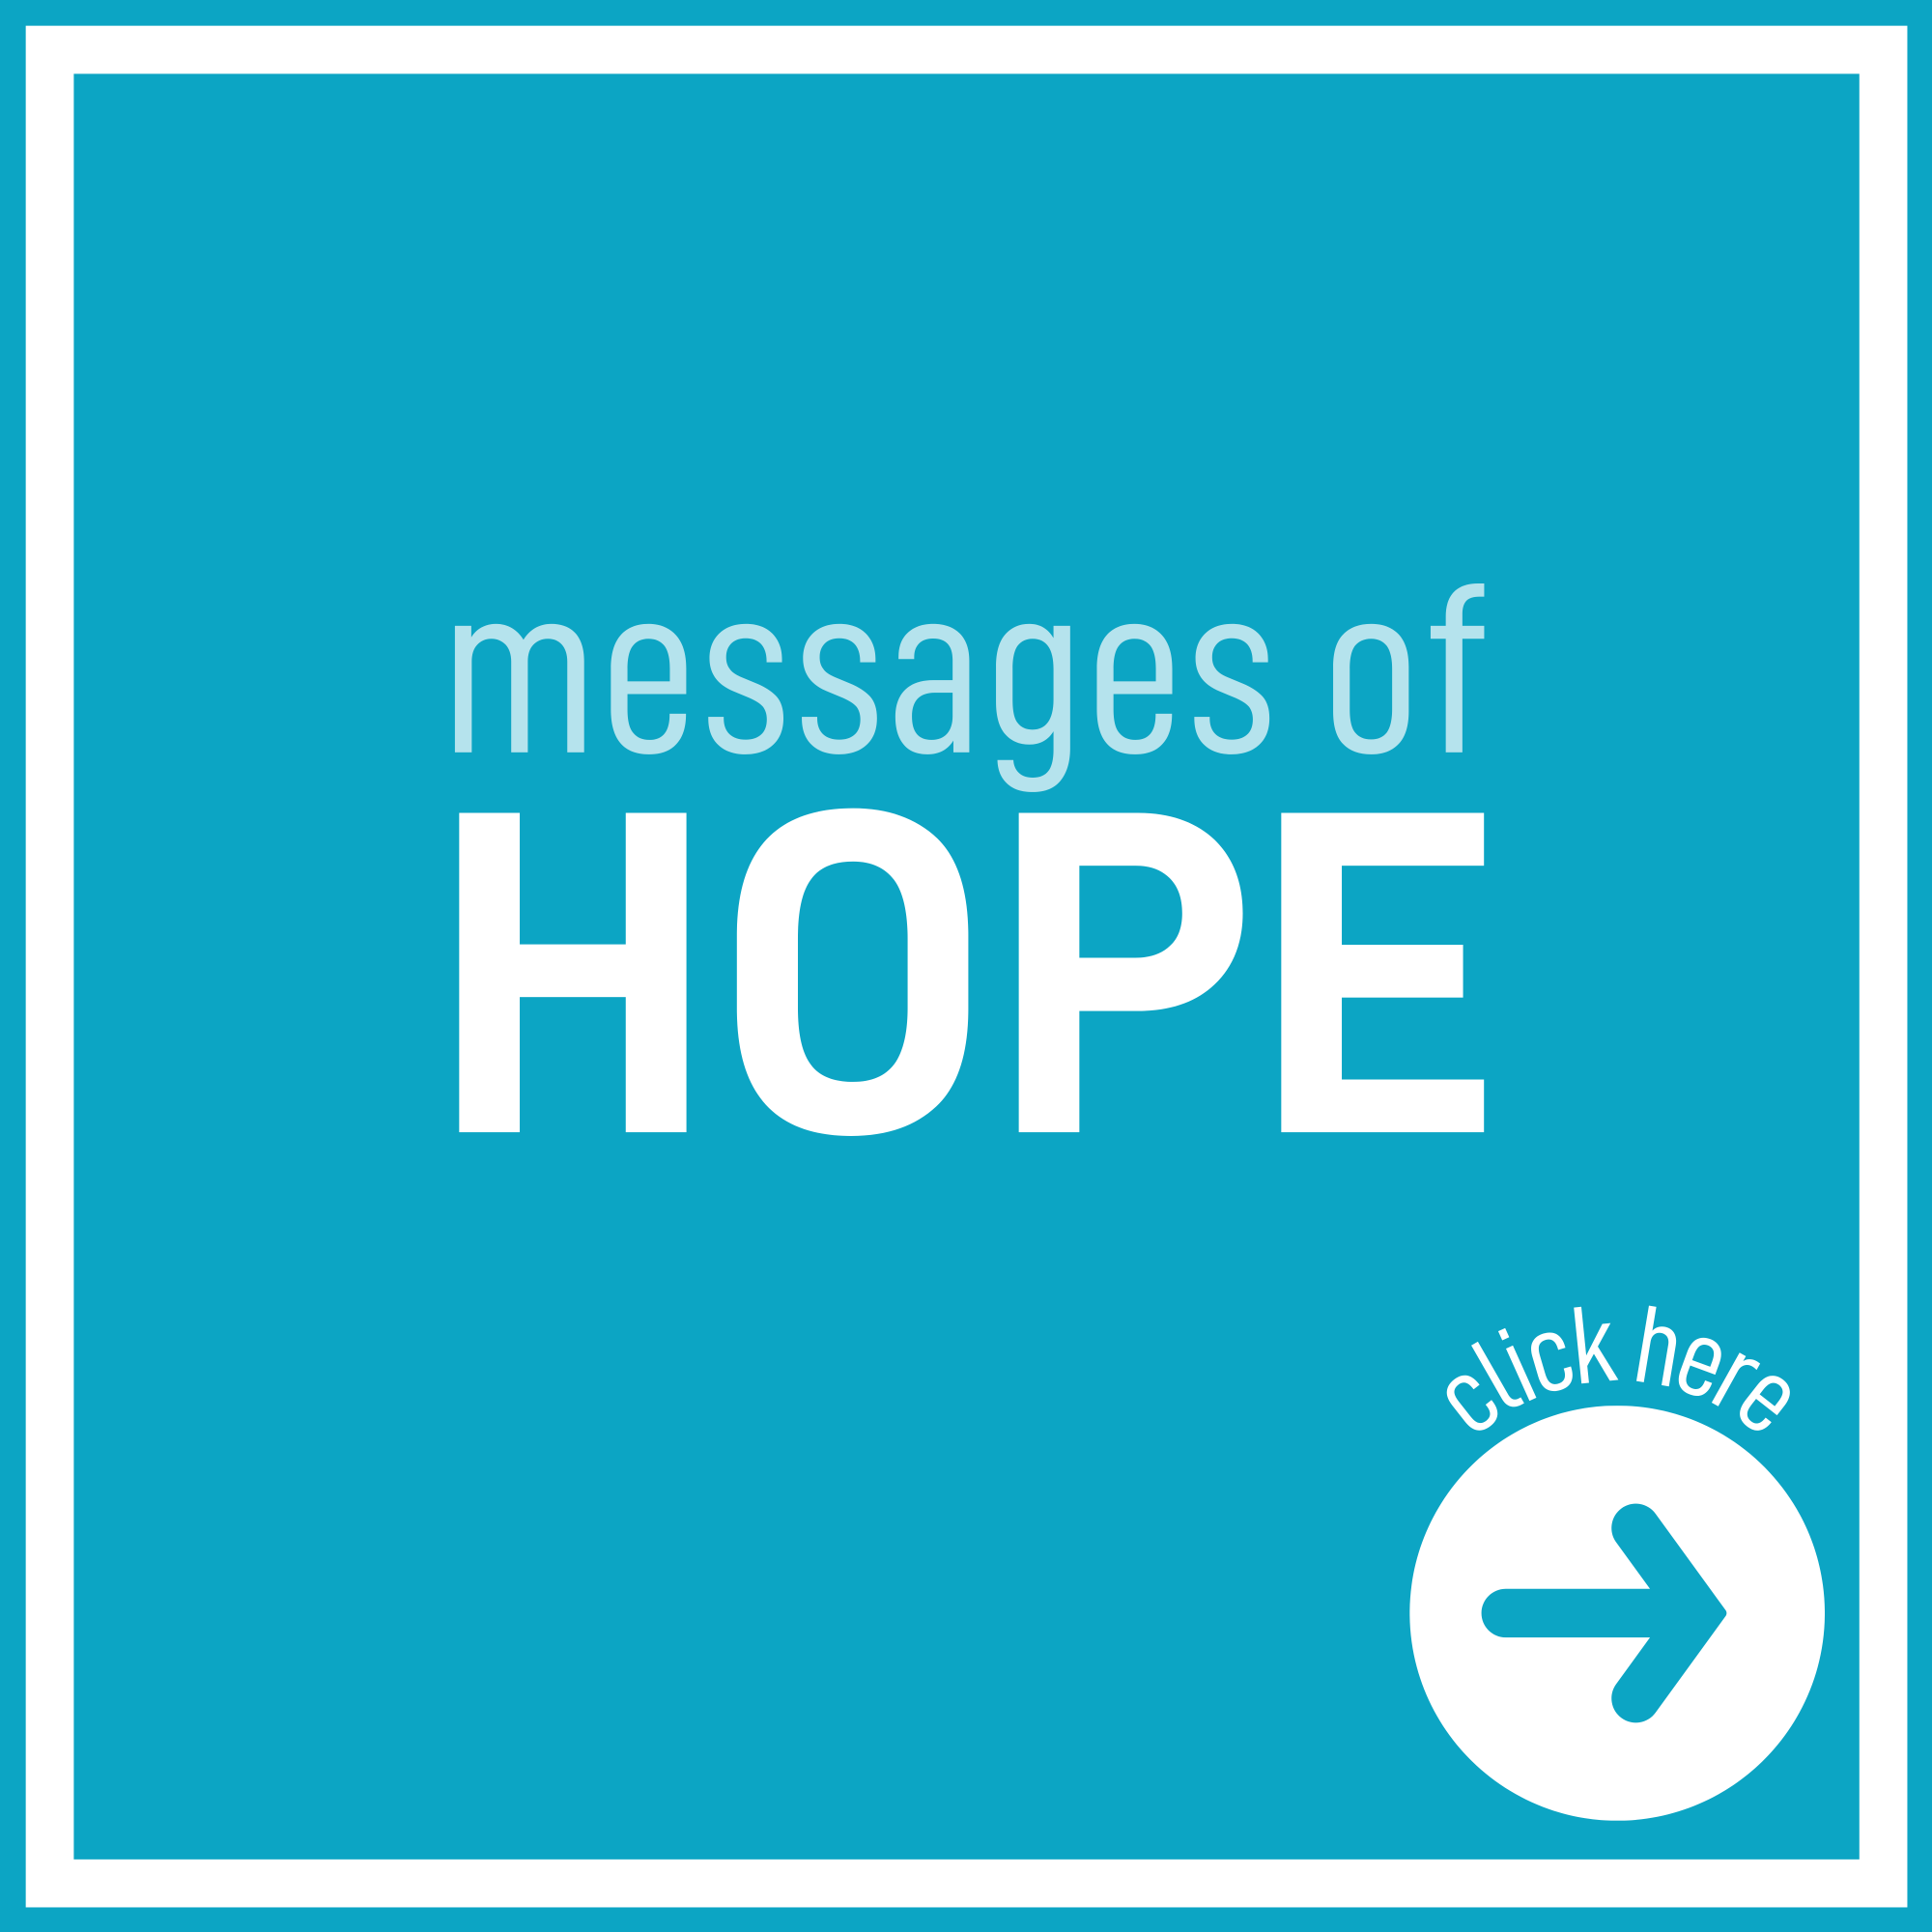 Blue square with white text that says "Messages of Hope"